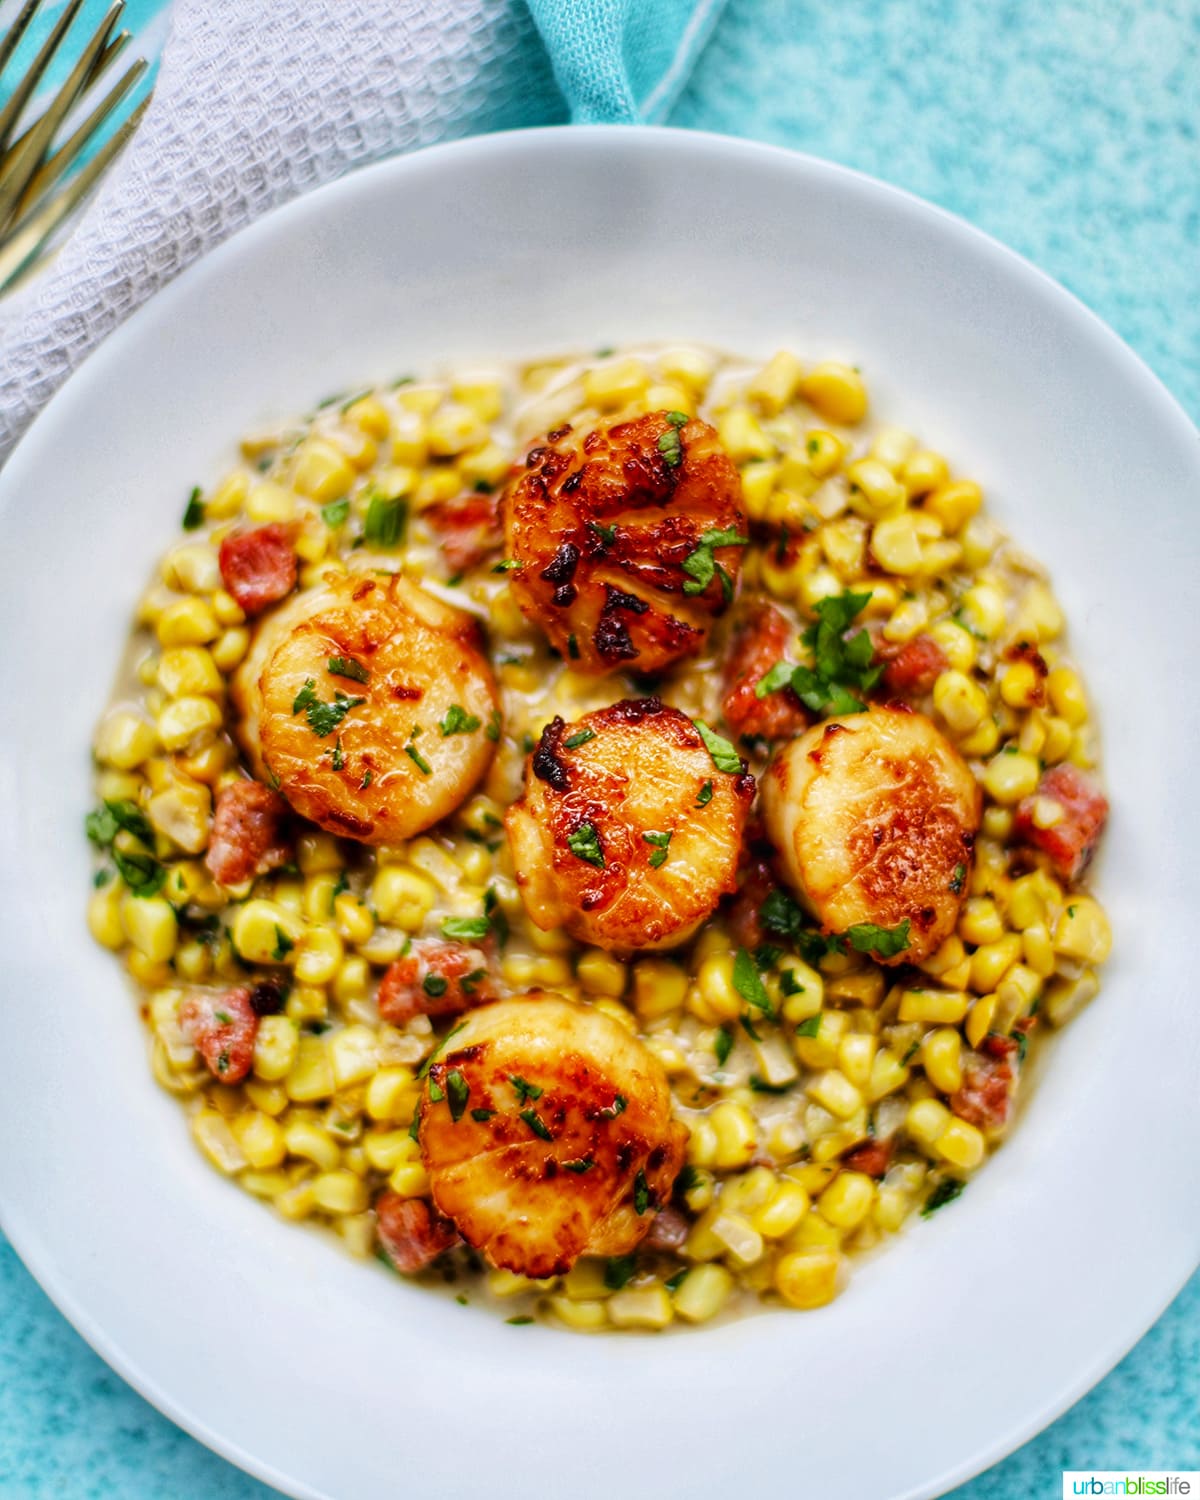 Seared scallops with corn and longganisa in a white bowl on a bright blue background.